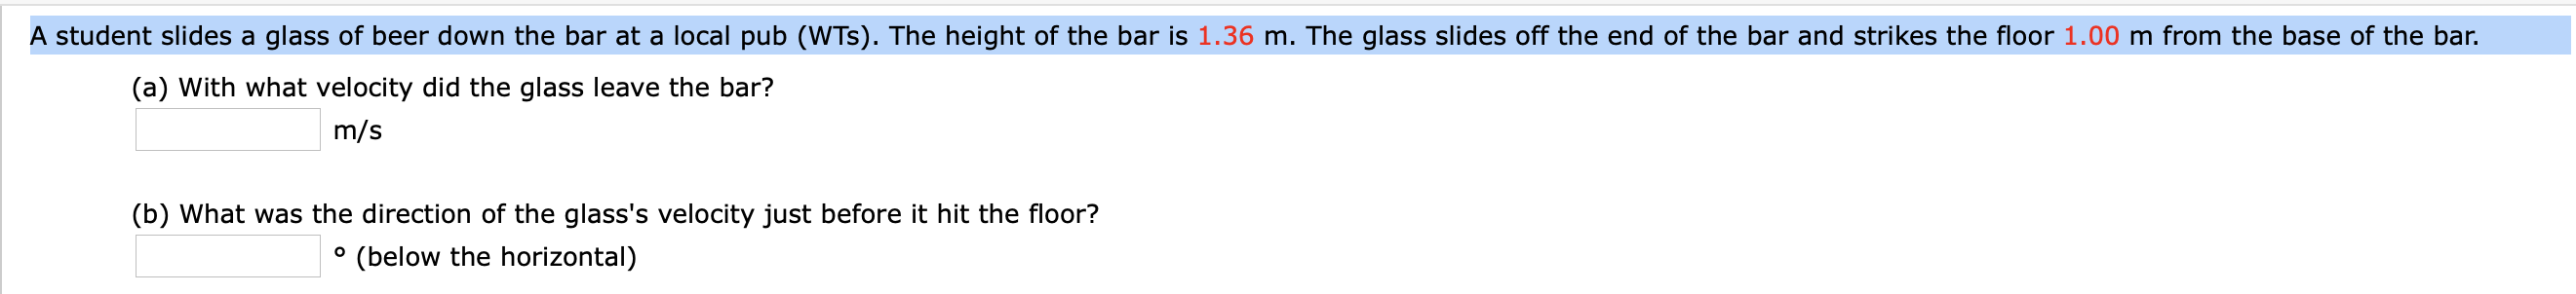 A student slides a glass of beer down the bar at a local pub (WTs). The height of the bar is 1.36 m. The glass slides off the end of the bar and strikes the floor 1.00 m from the base of the bar.
(a) With what velocity did the glass leave the bar?
m/s
(b) What was the direction of the glass's velocity just before it hit the floor?
(below the horizontal)
